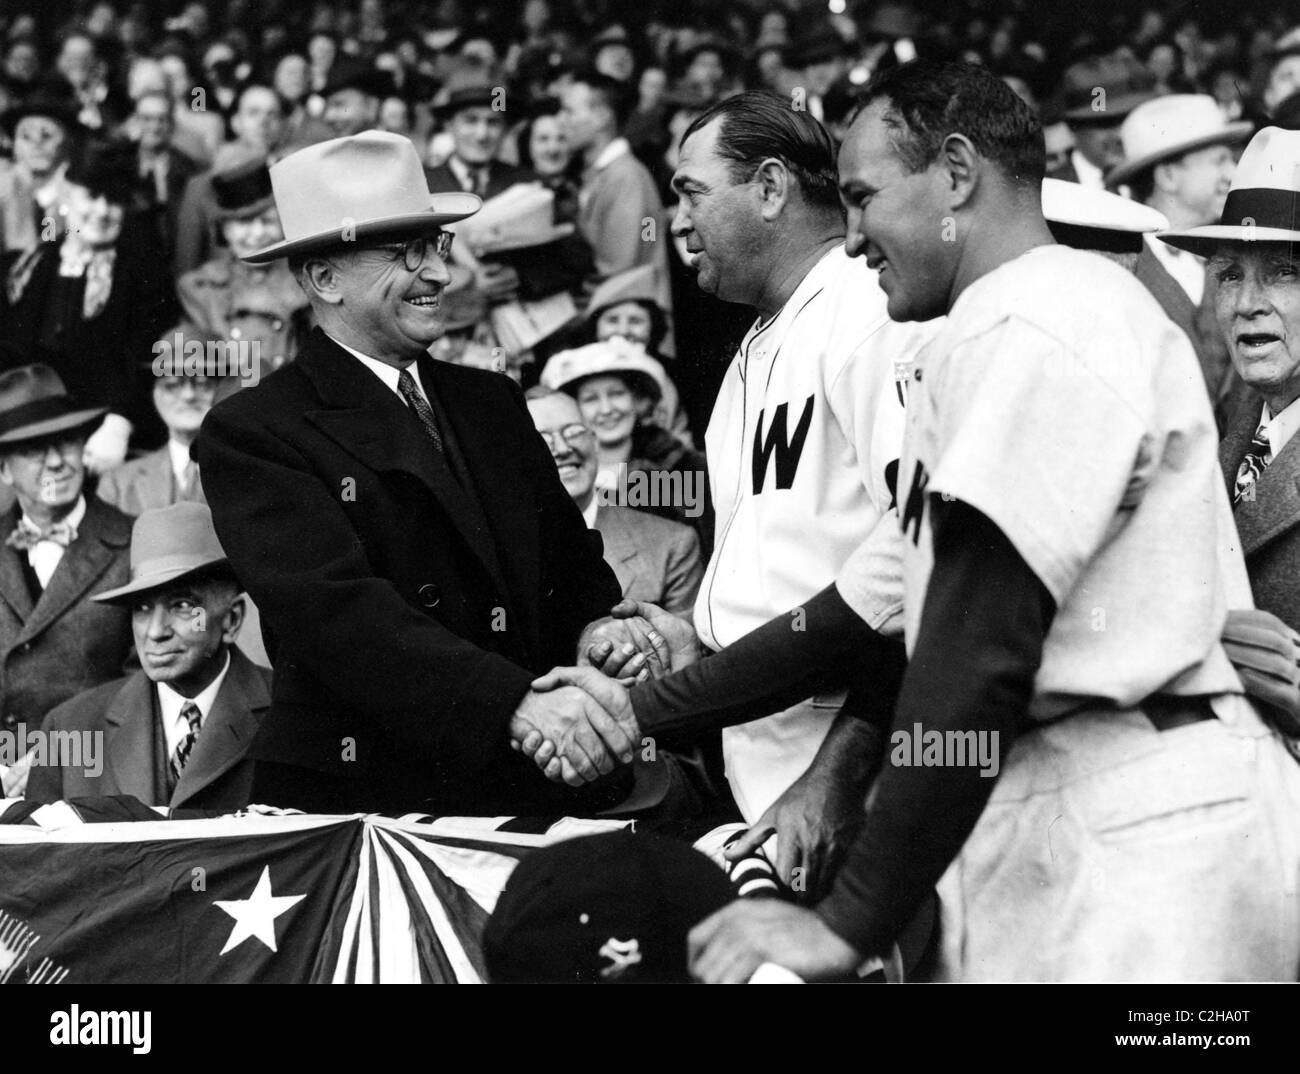 President Harry Truman Shakes hands with Players Stock Photo